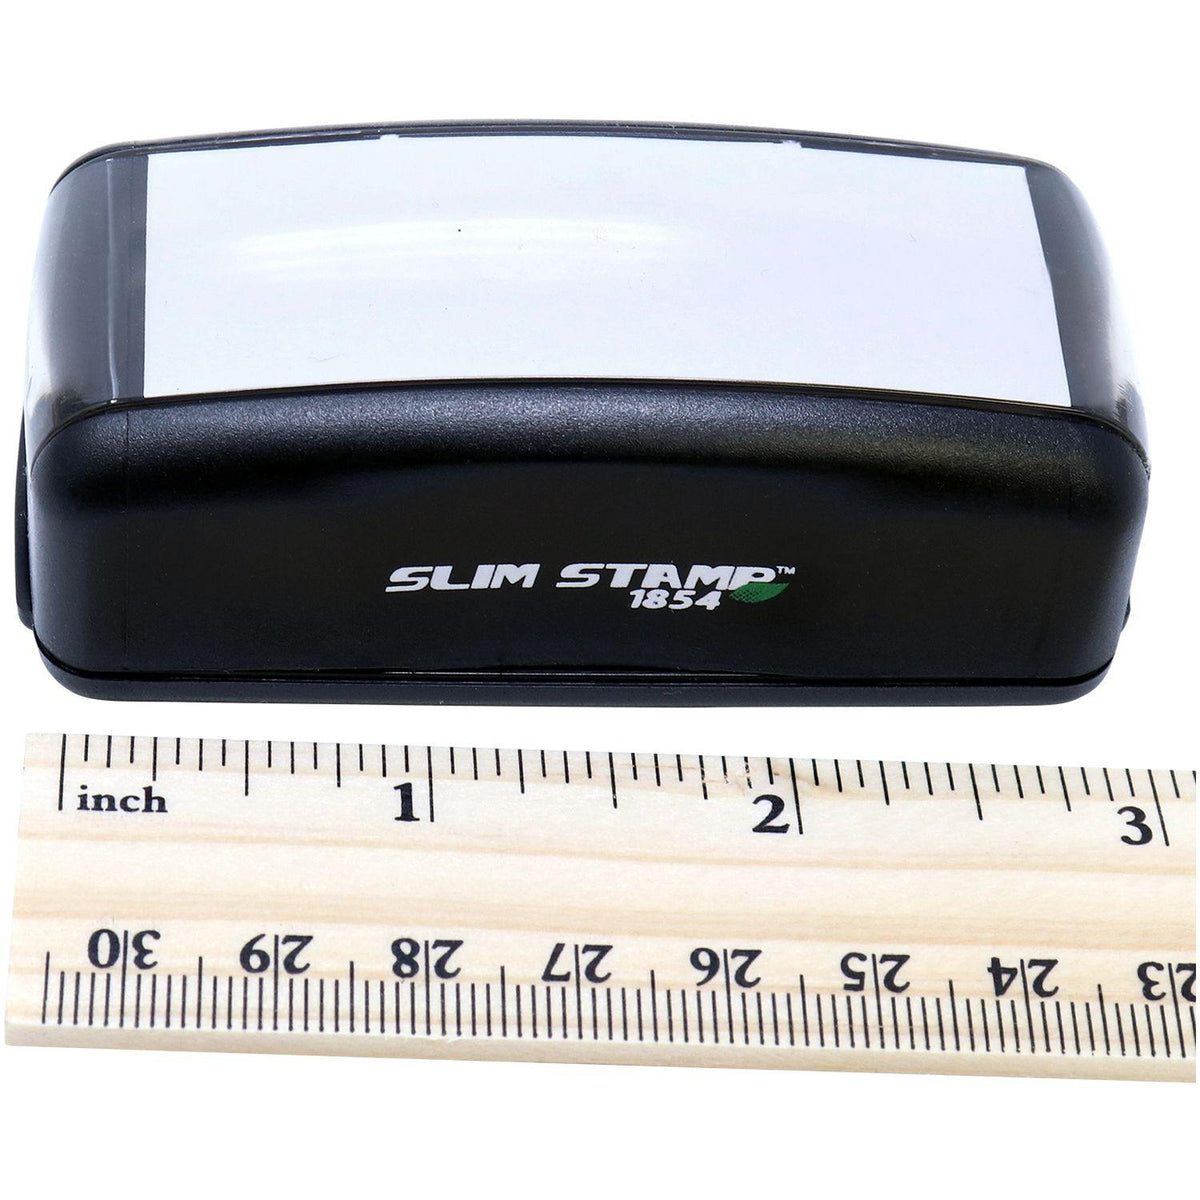 Measurement Large Pre Inked Bcbs Stamp with Ruler